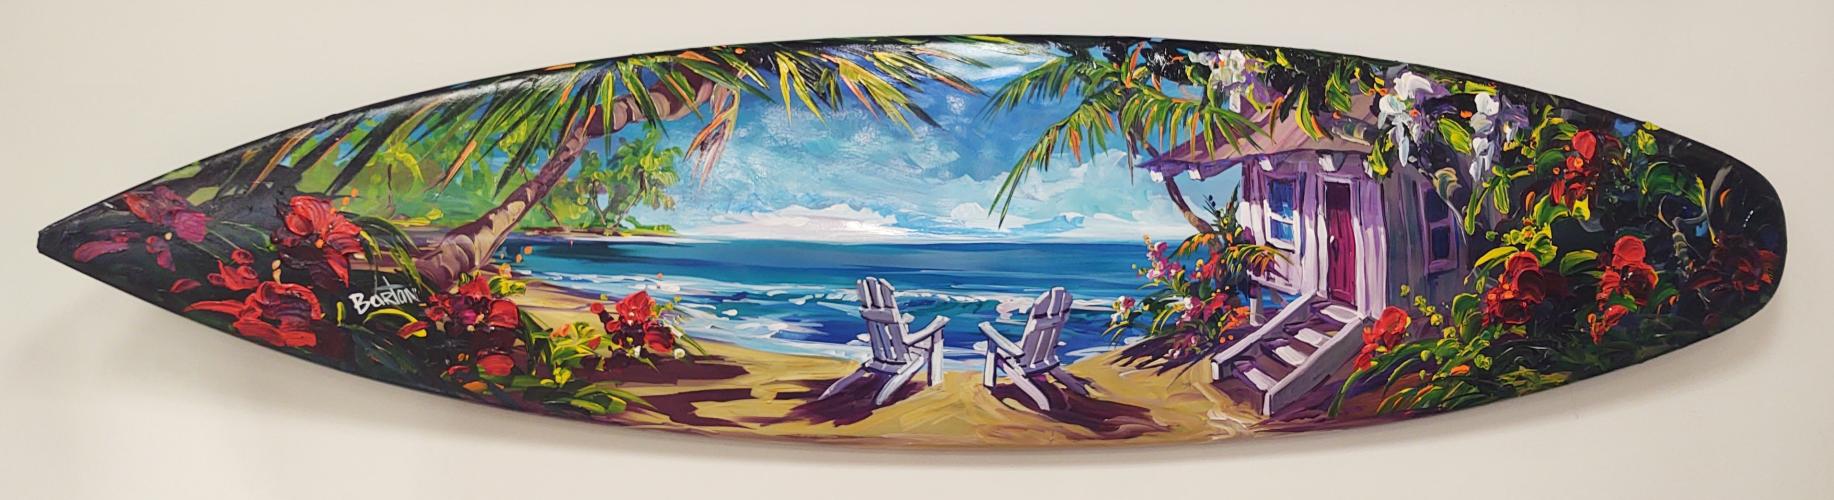 <b>*NEW*</b> Our Forever Original Acrylic on 6ft Surfboard by Steve Barton